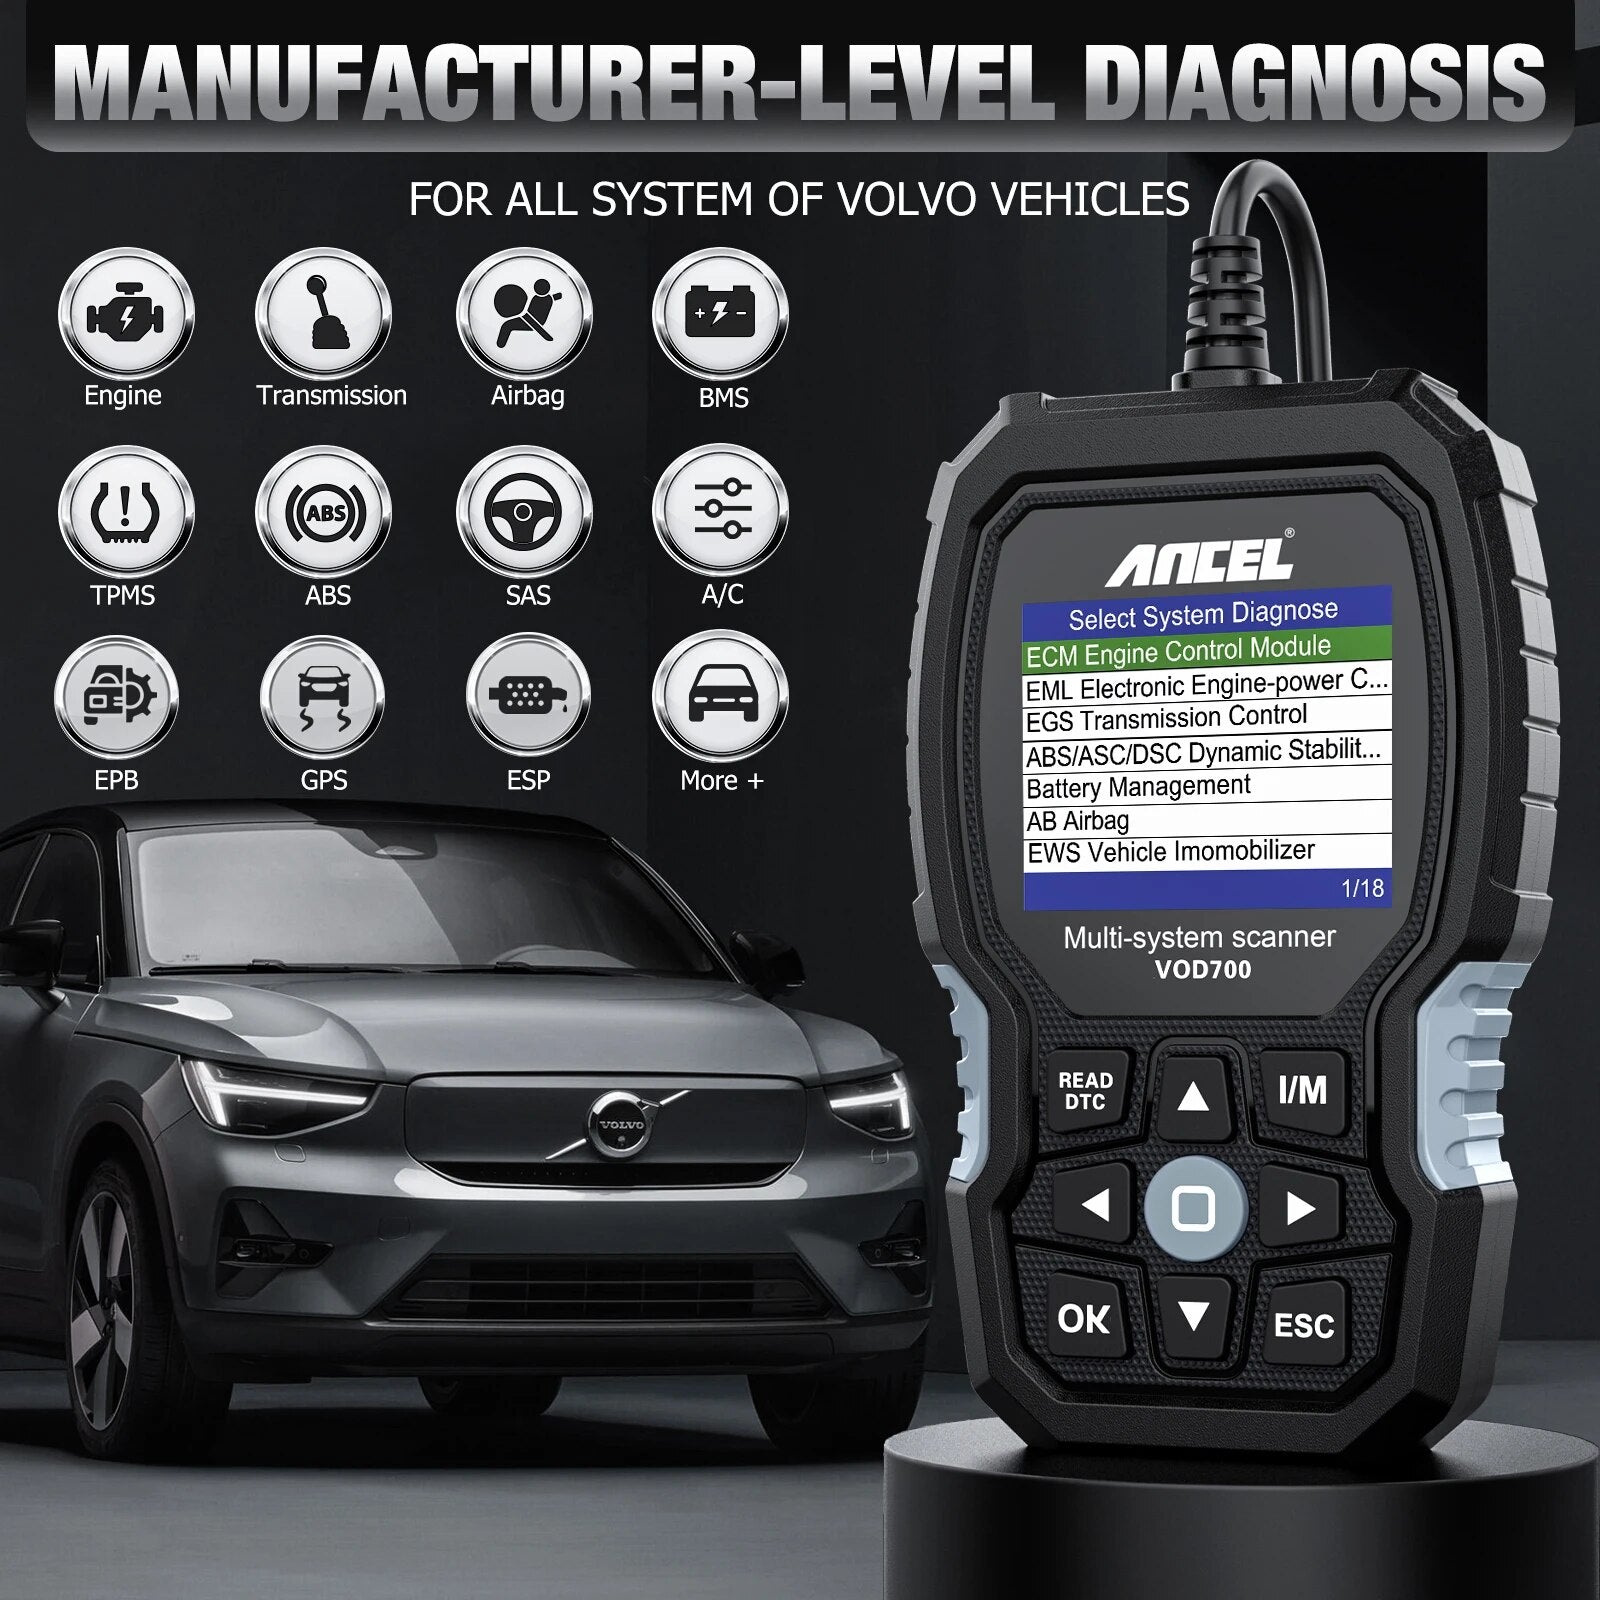 ANCEL VOD700 OBD2 Scanner for Volvo Car Code Reader Diagnostic Scan Tool ABS Bleeding Injector Oil ETC BMS EPB TPMS DPF Reset